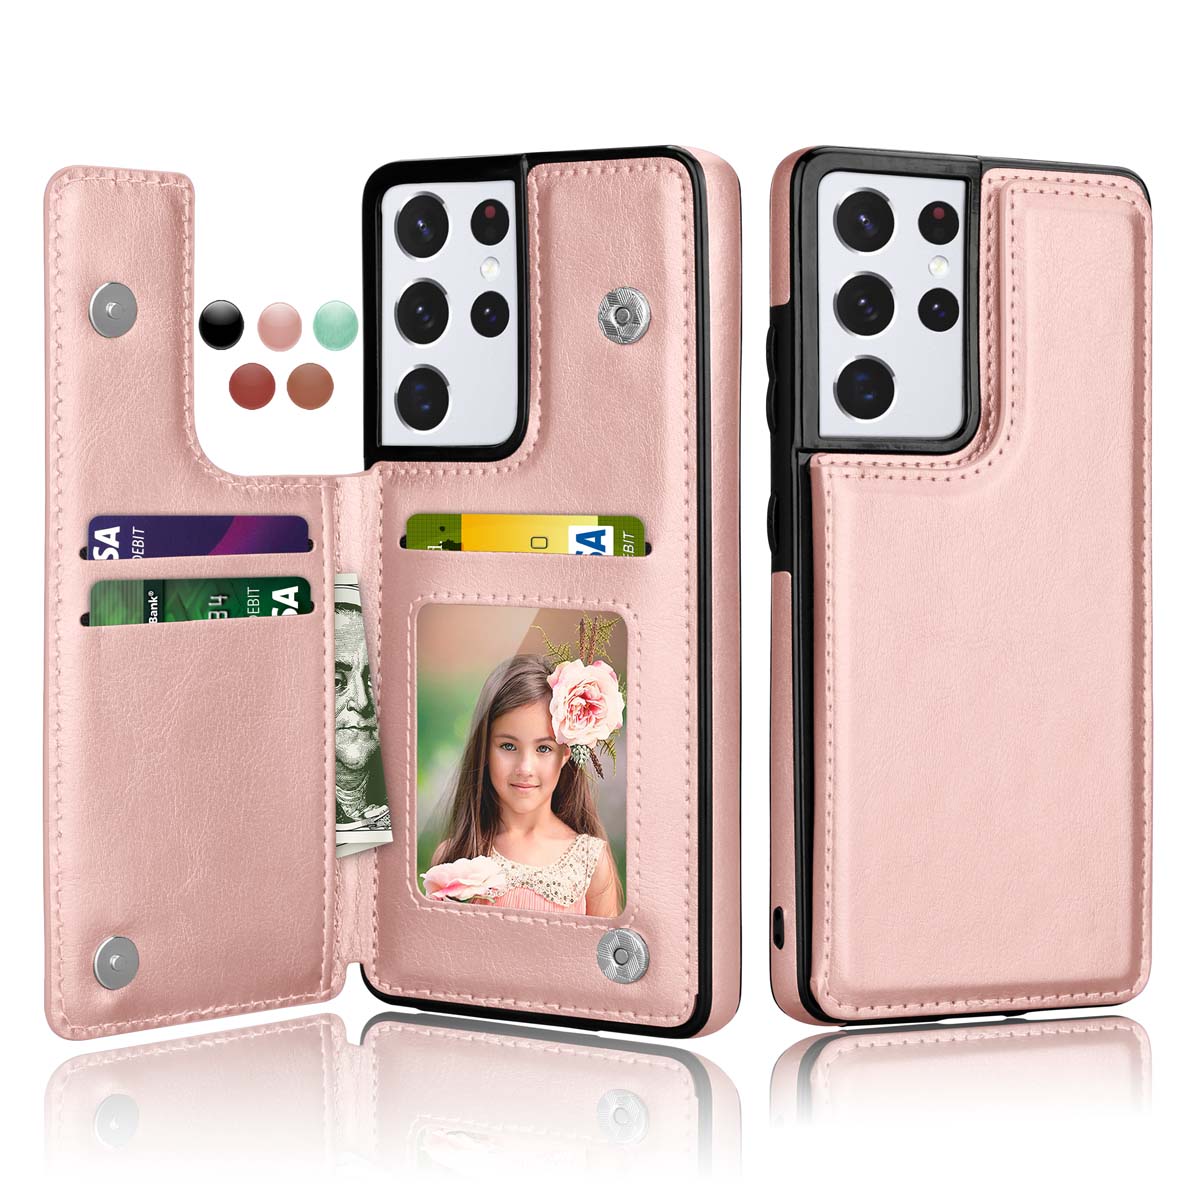 Cases for Galaxy S21 S21+ S21 Ultra 5G, Njjex Leather Flip Wallet Card Holder Case Cover for Samsung Galaxy S21 21+ S21 Plus S21 Ultra 5G 2021, Rose Gold - image 1 of 11